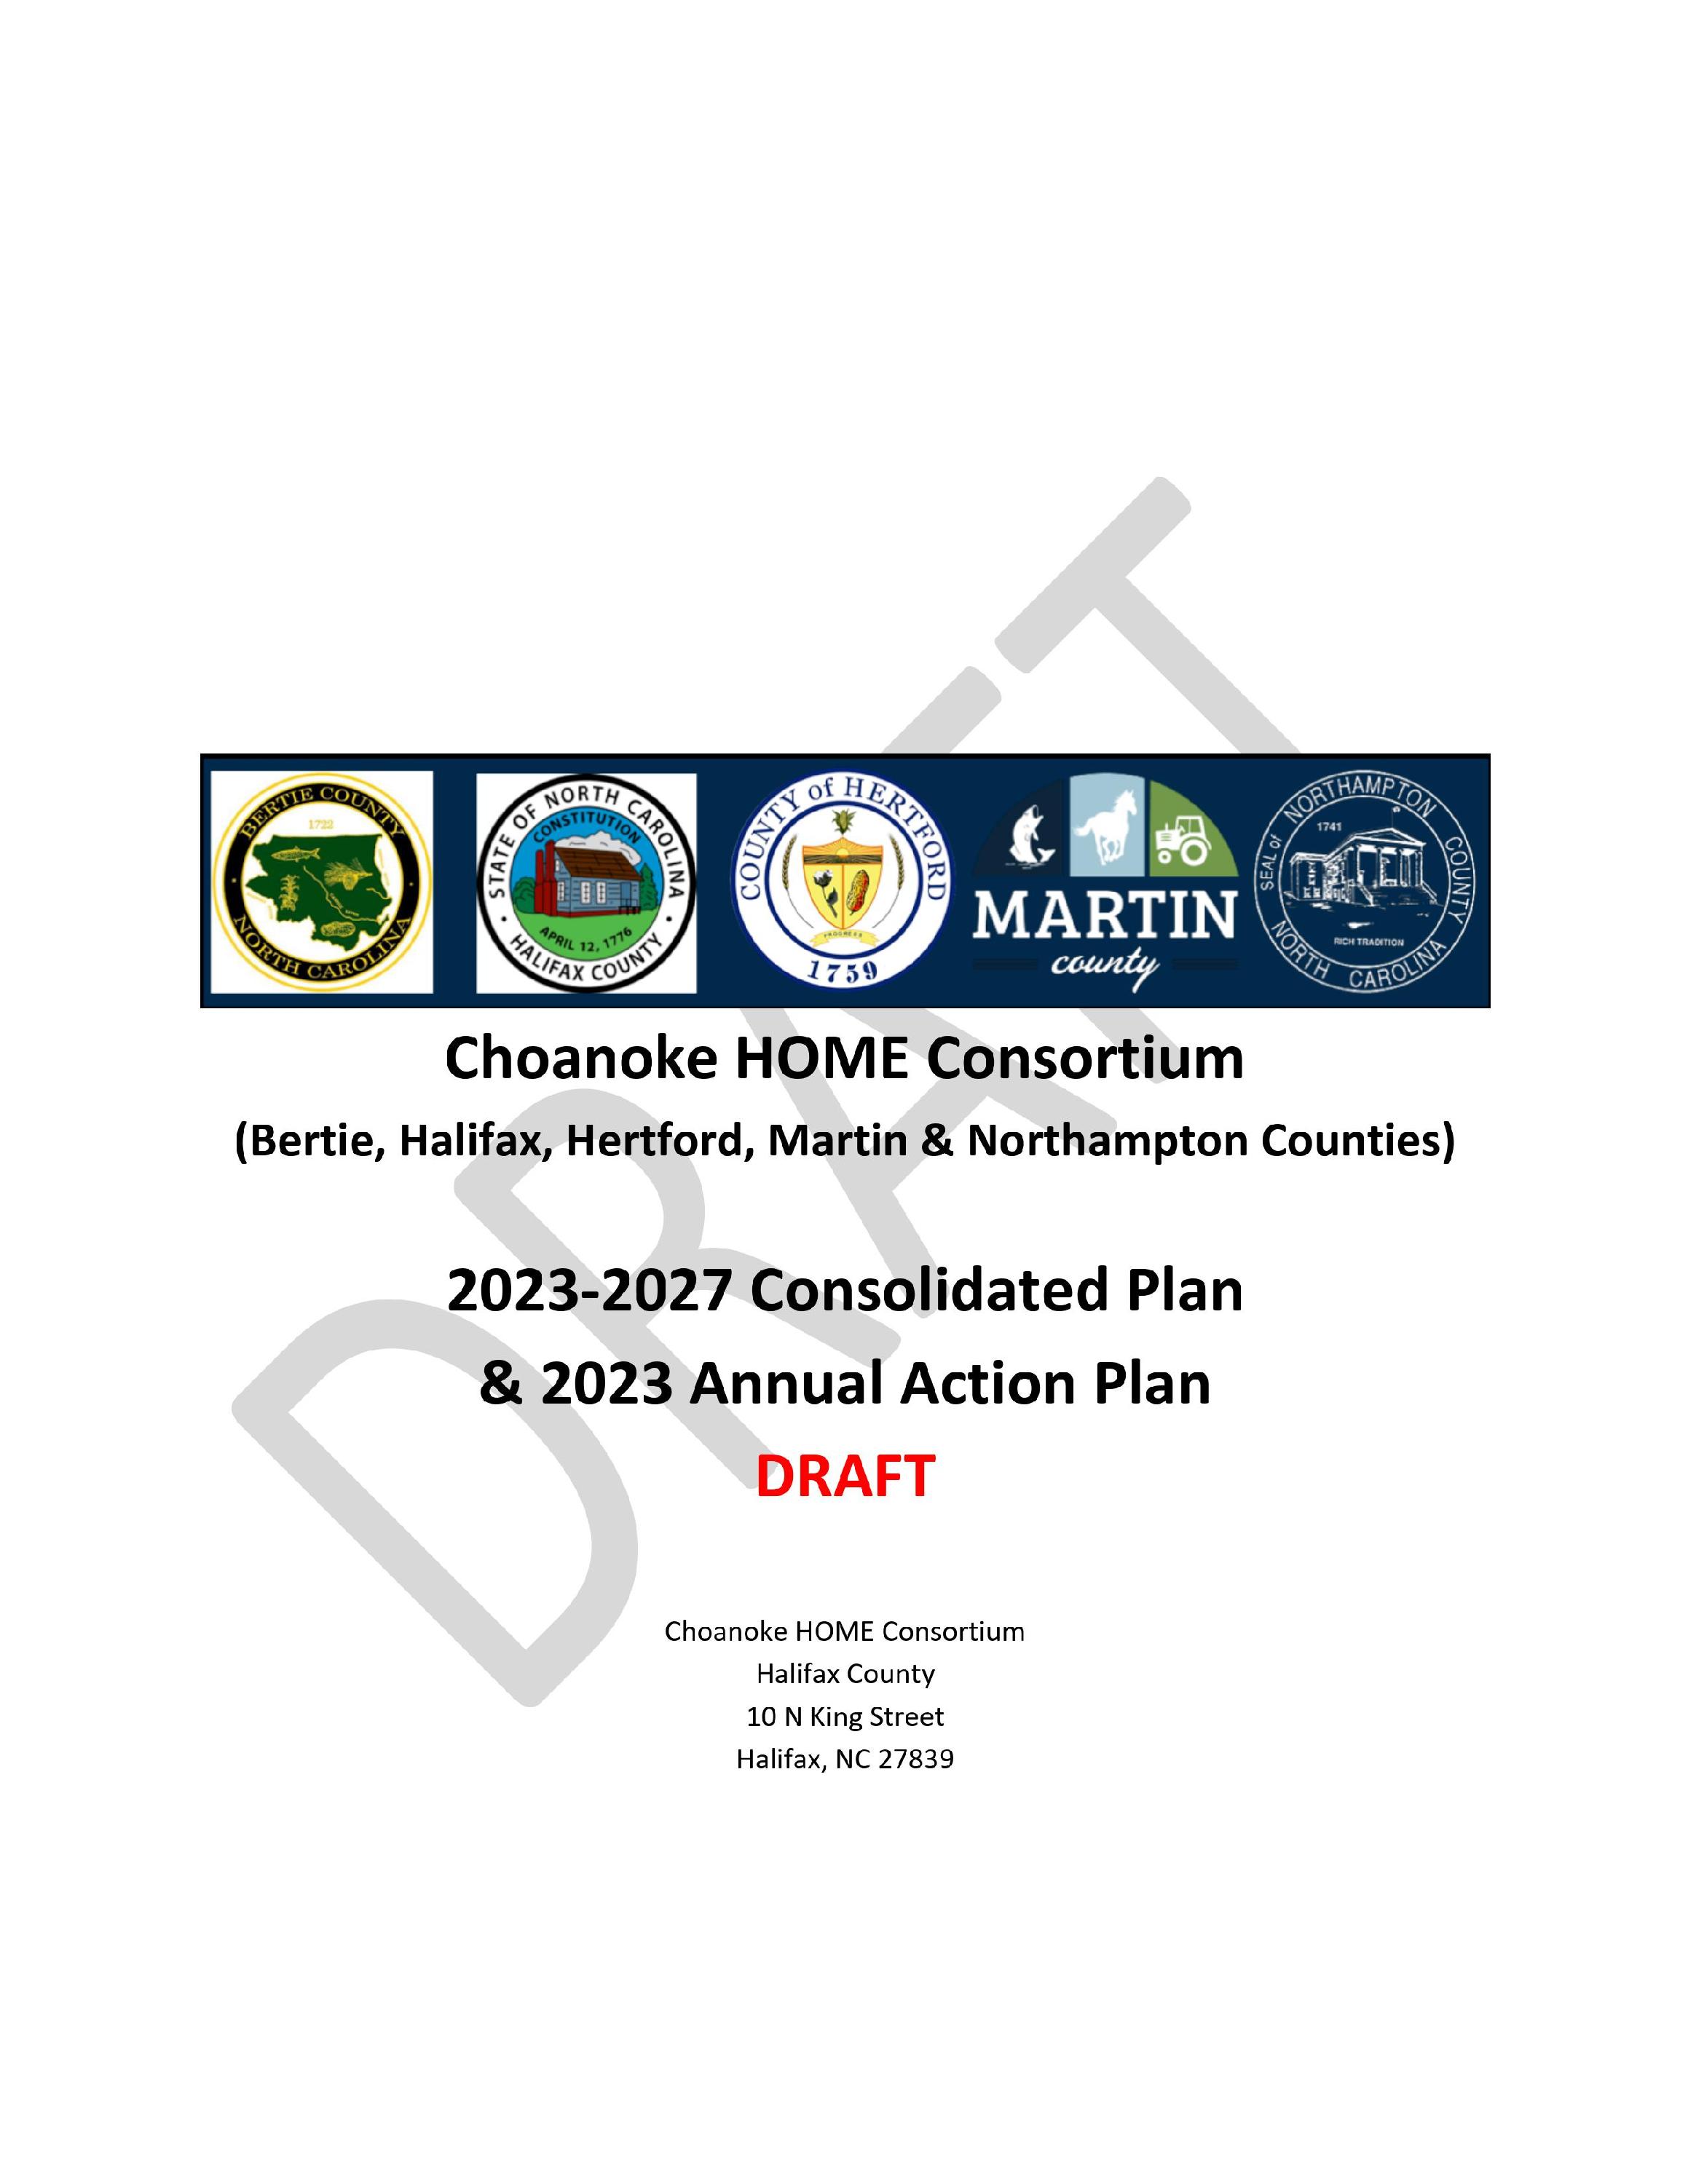 Choanoke HOME Consortium Full Draft 4.10.2023-pages-1